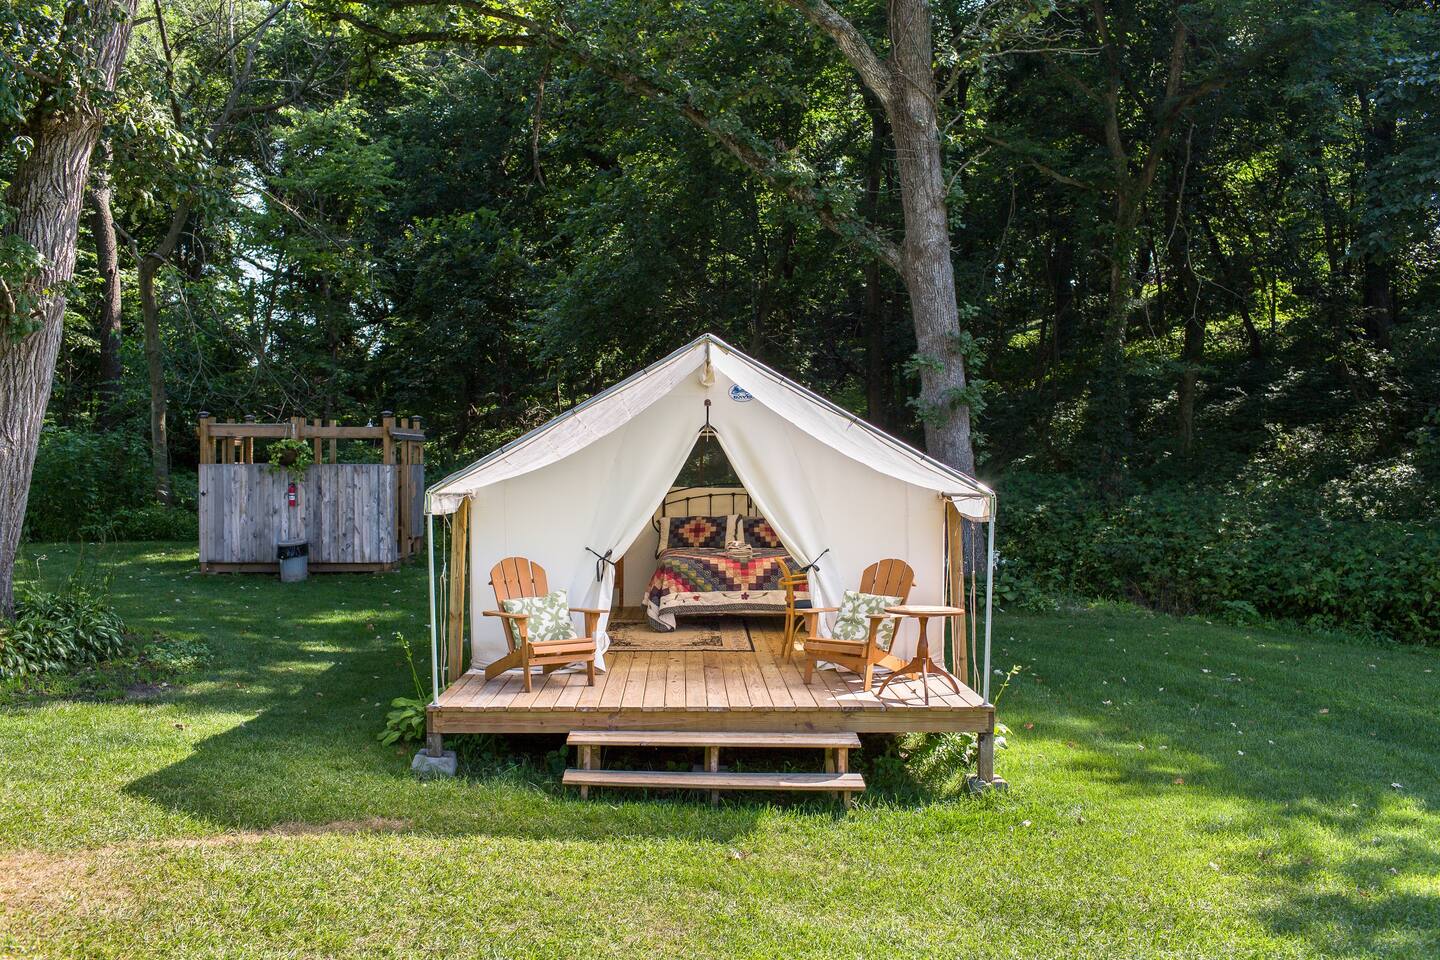 Lazy Oaks Glamping, one of the best Airbnbs in the United States